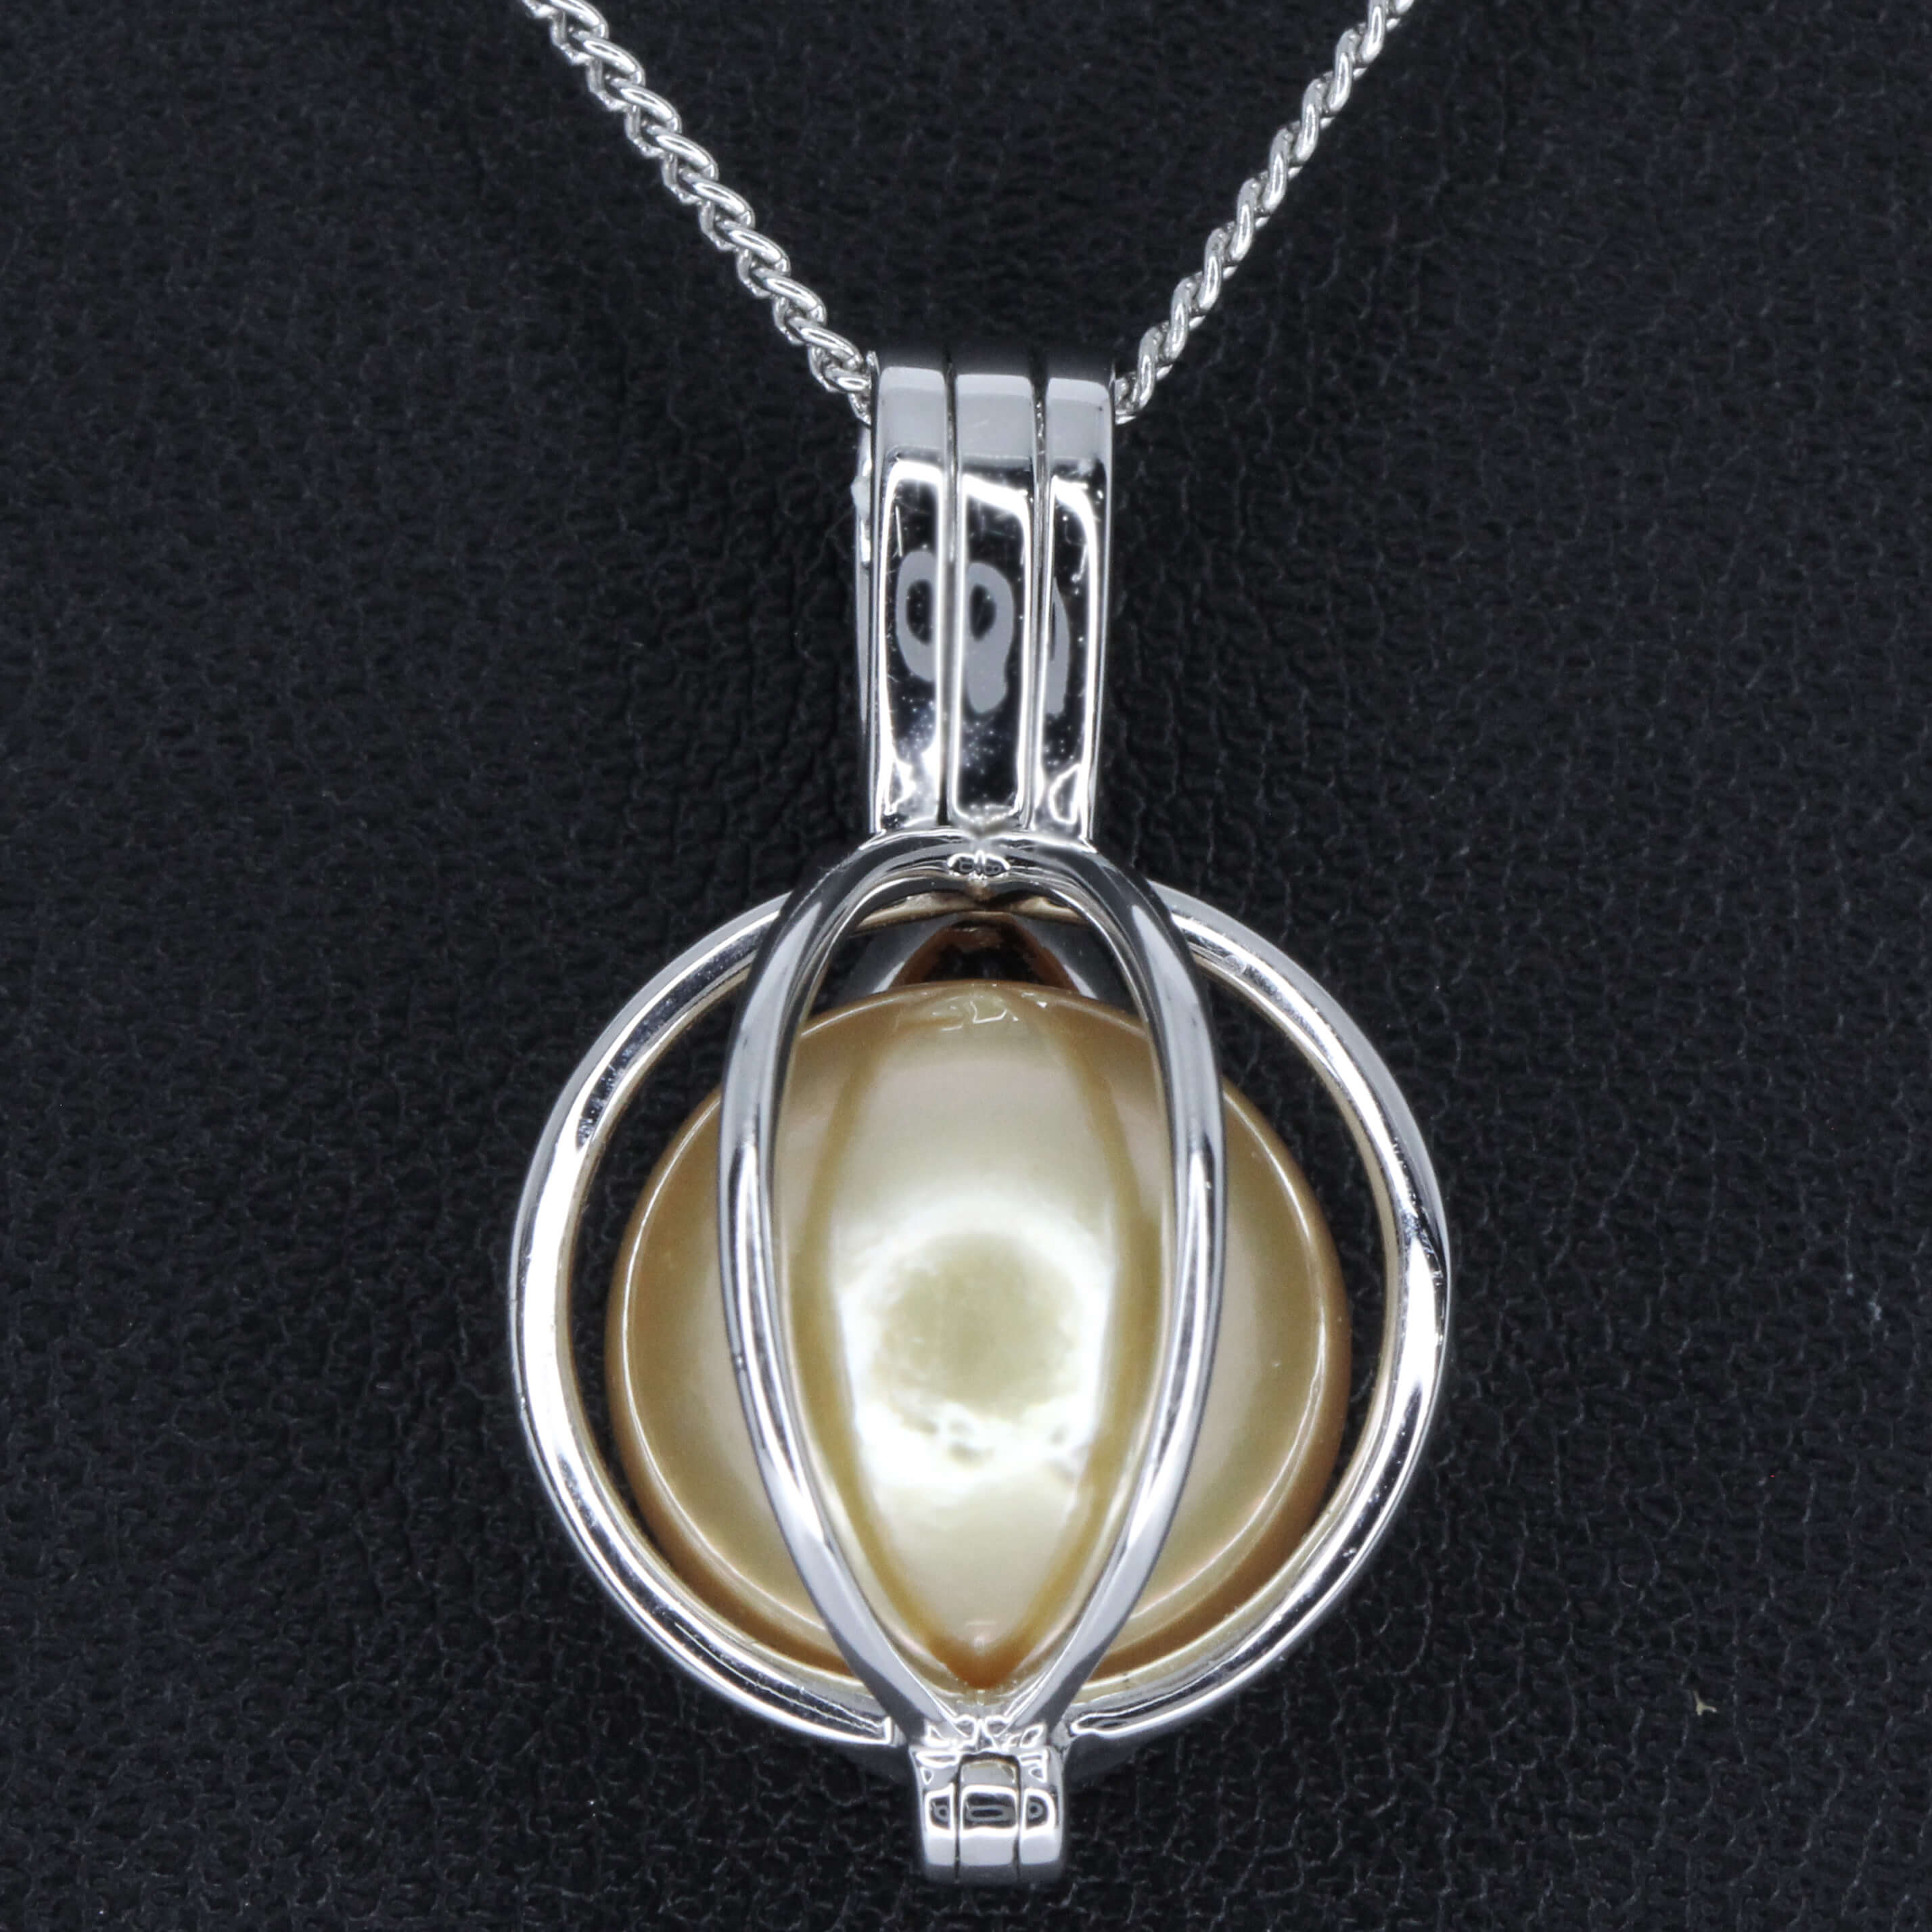 Golden South Sea Pearl Pendant set in 18ct White Gold | Allgem Jewellers